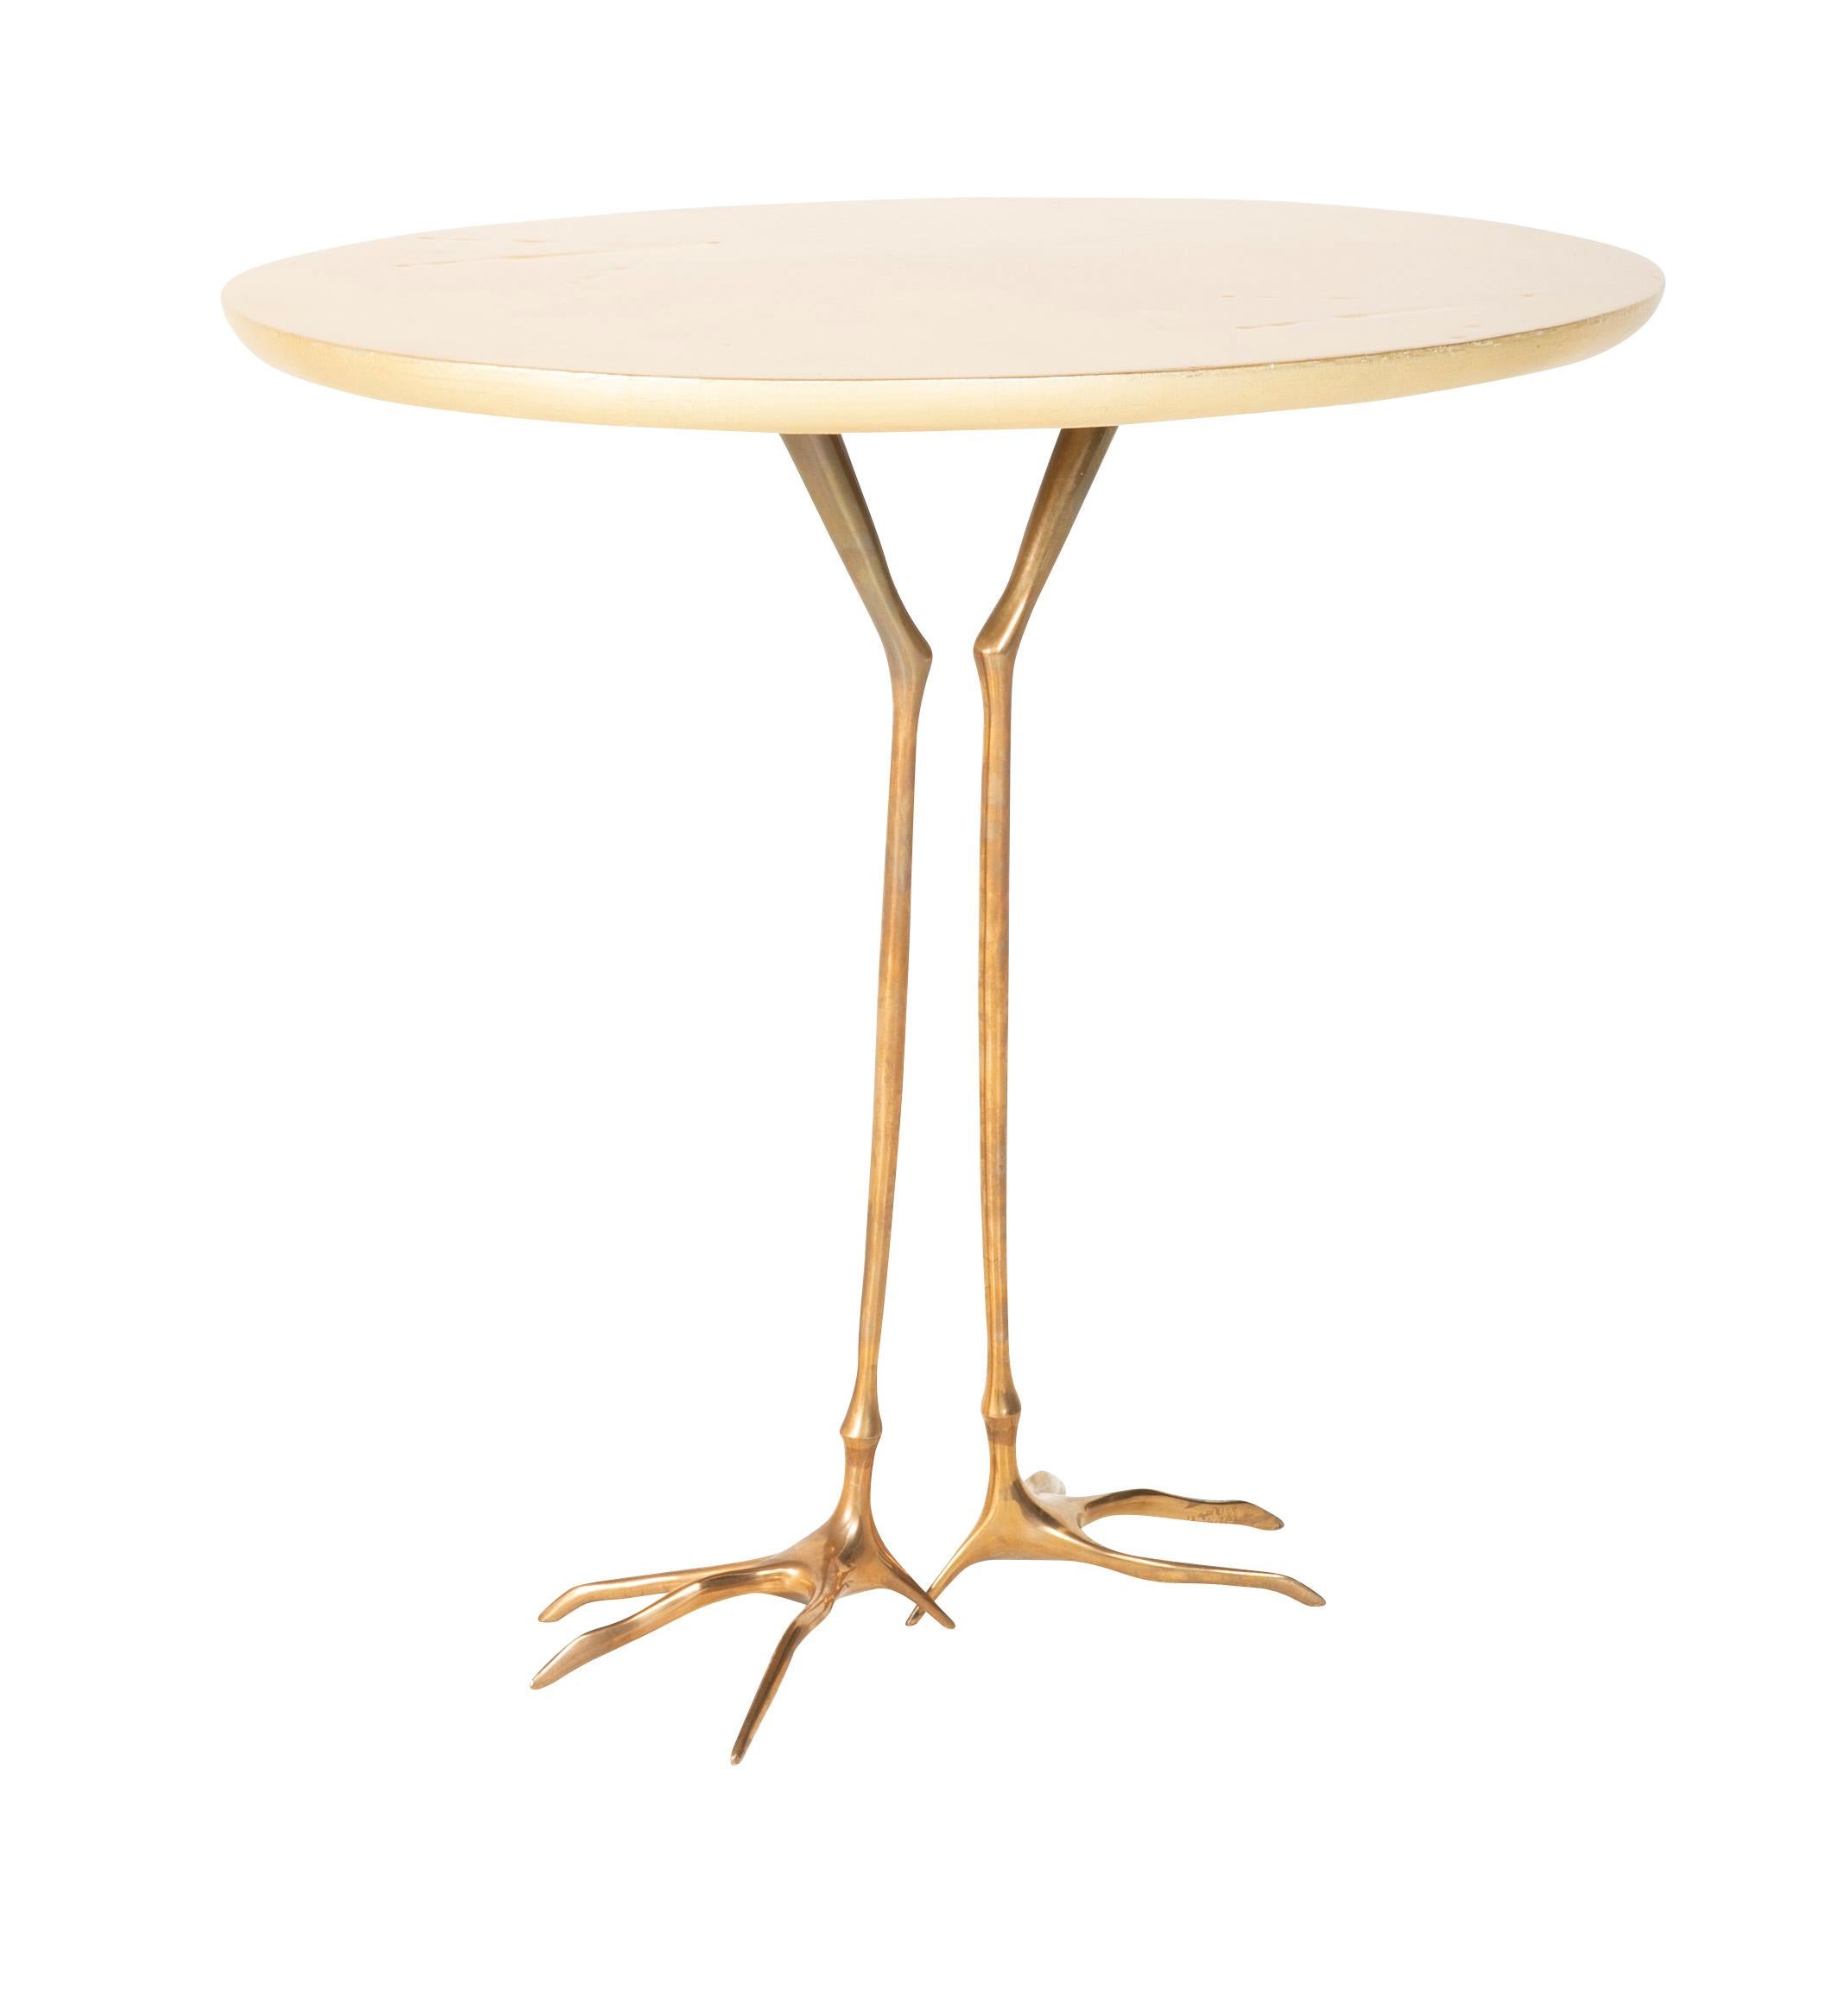 A table designed by Surrealist artist Meret Oppenheim for Simon Gavina. The 'Traccia' table has bronze bird form legs with oval gold leafed top with incised a two bird foot prints in top.